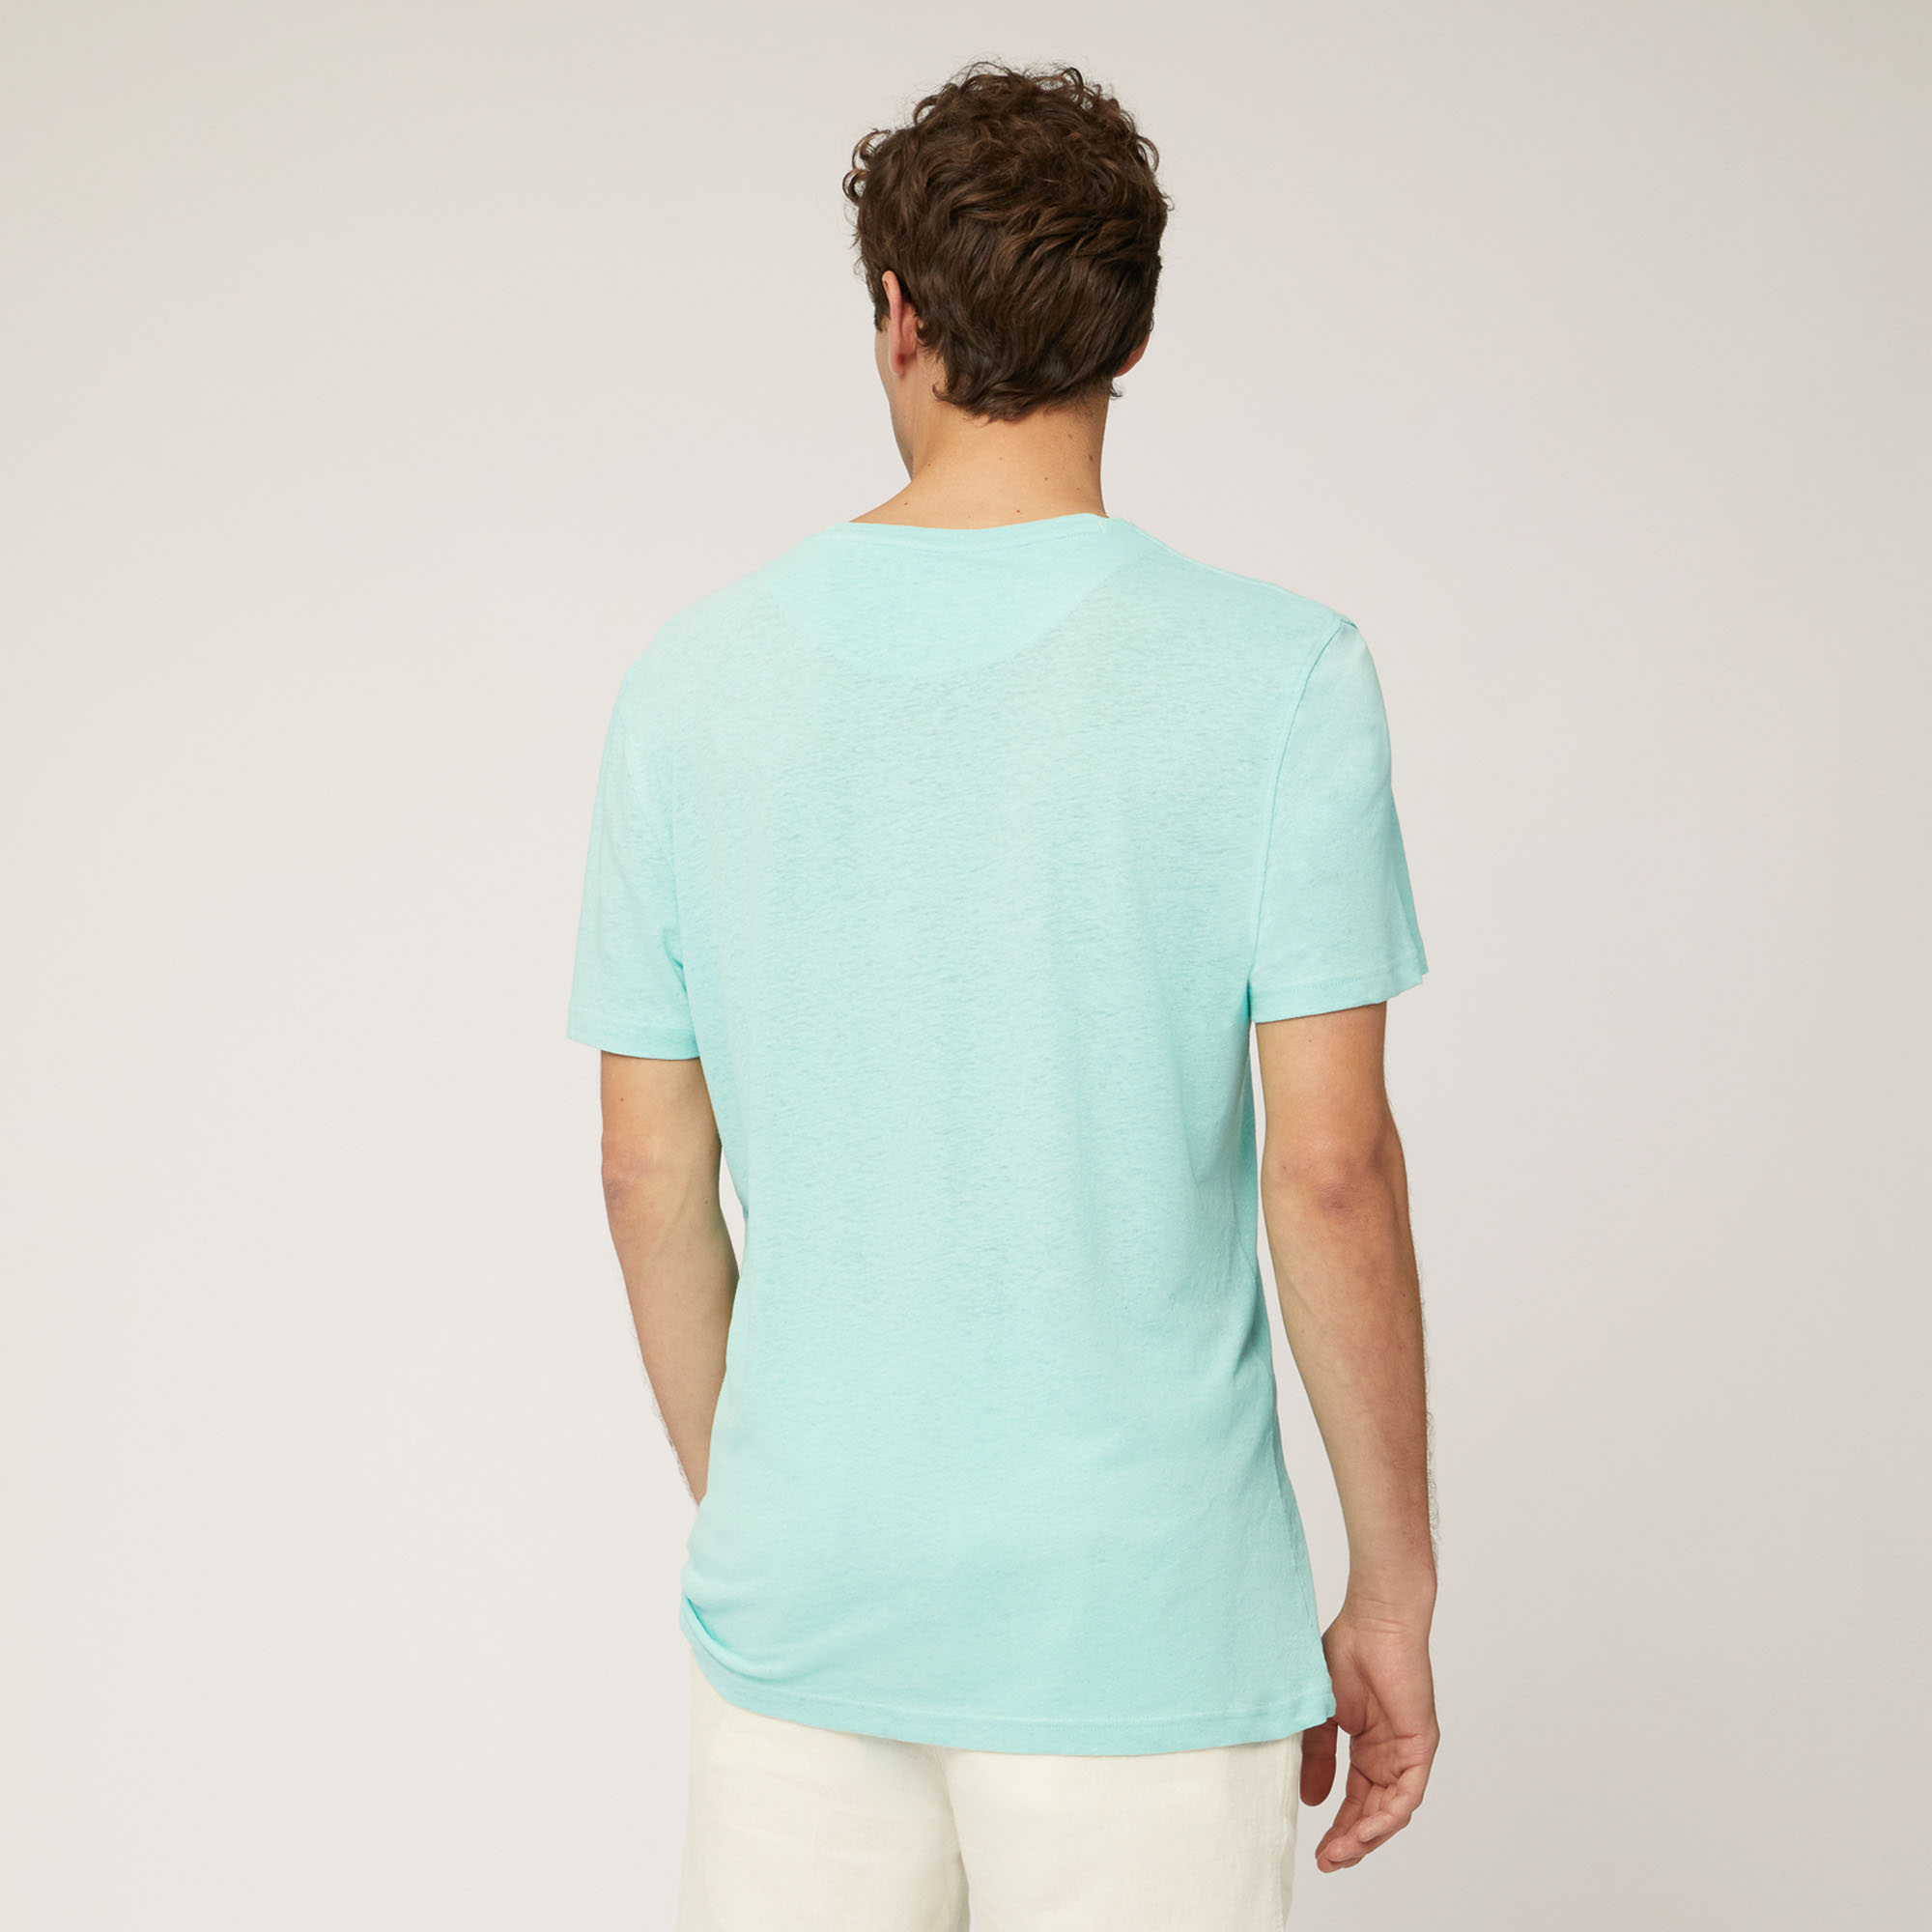 Linen and Cotton T-Shirt, Light Blue, large image number 1